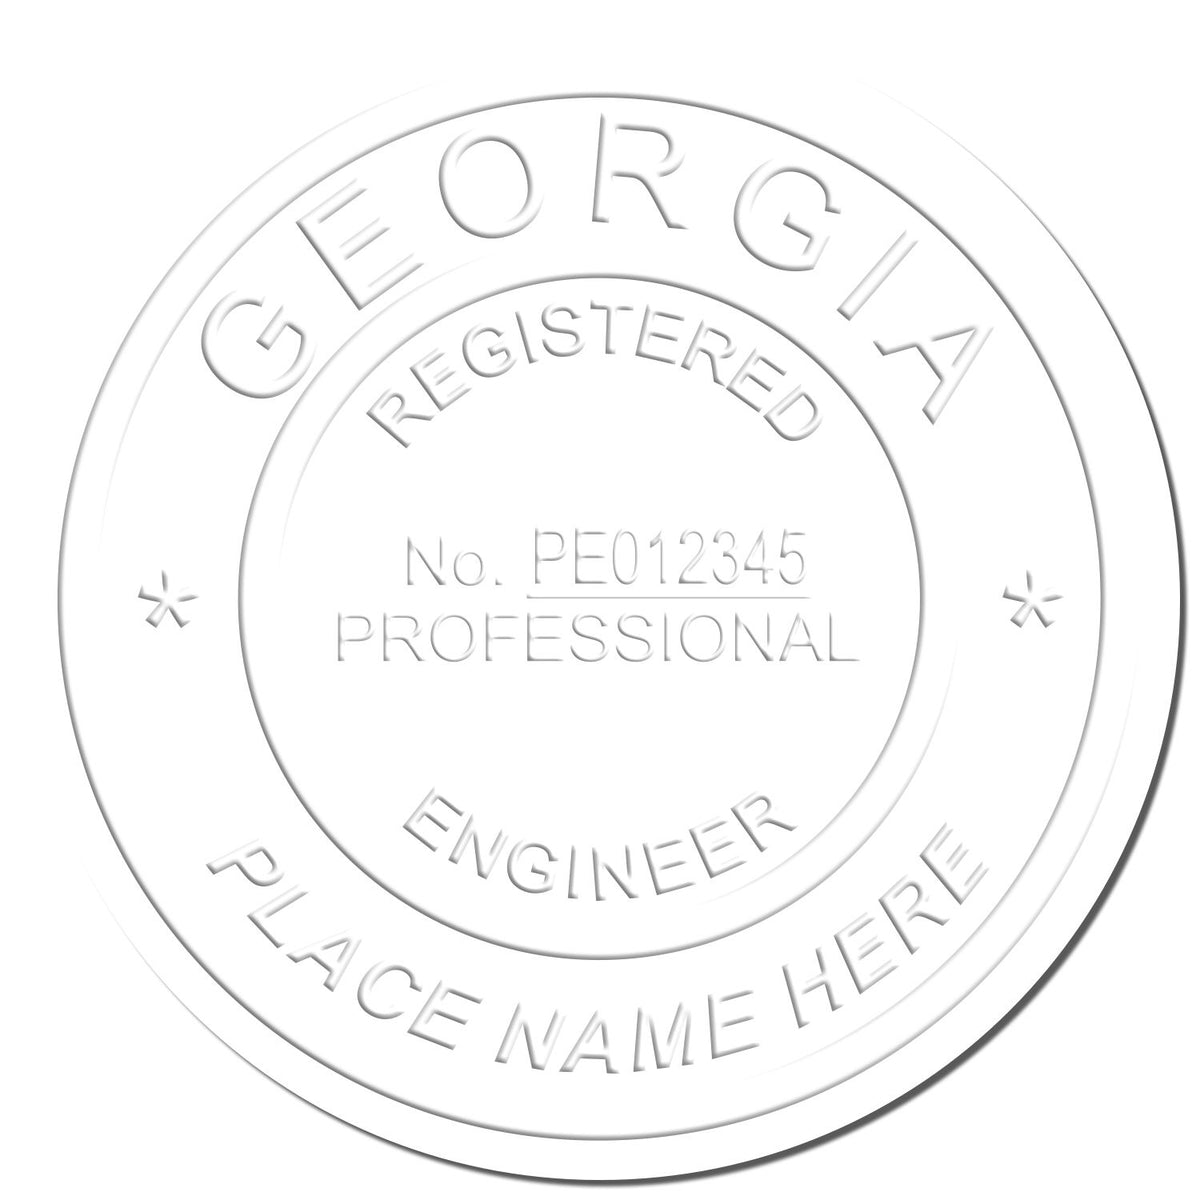 This paper is stamped with a sample imprint of the Hybrid Georgia Engineer Seal, signifying its quality and reliability.